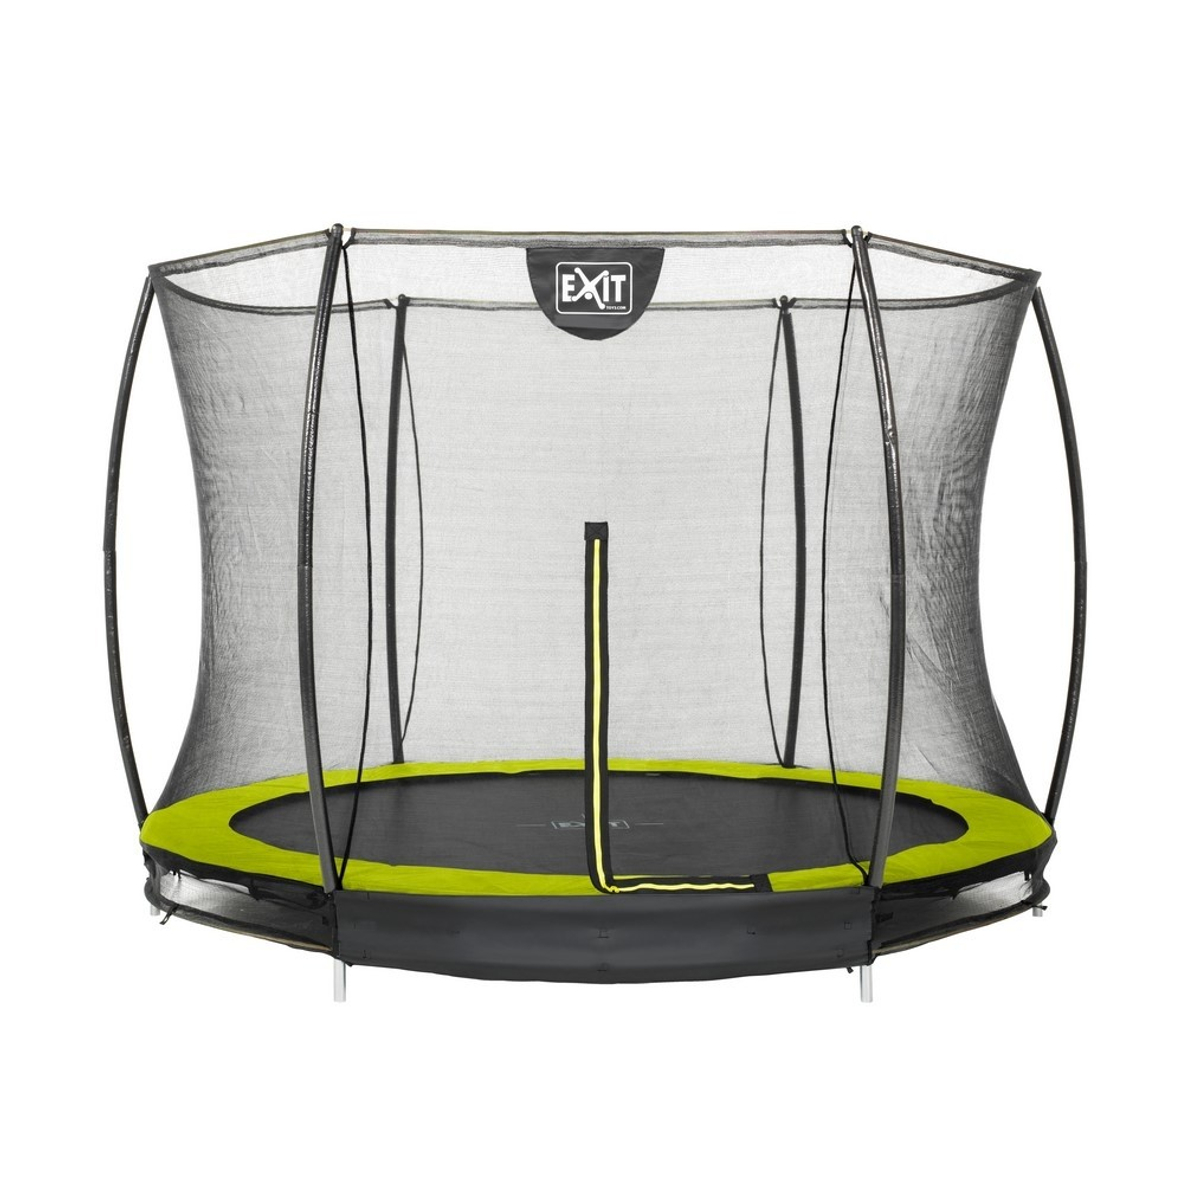 Zelfrespect opgraven Alice Exit Trampoline Silhouette Inground + Safety Net 305 Lime | Belomax.be -  Belomax